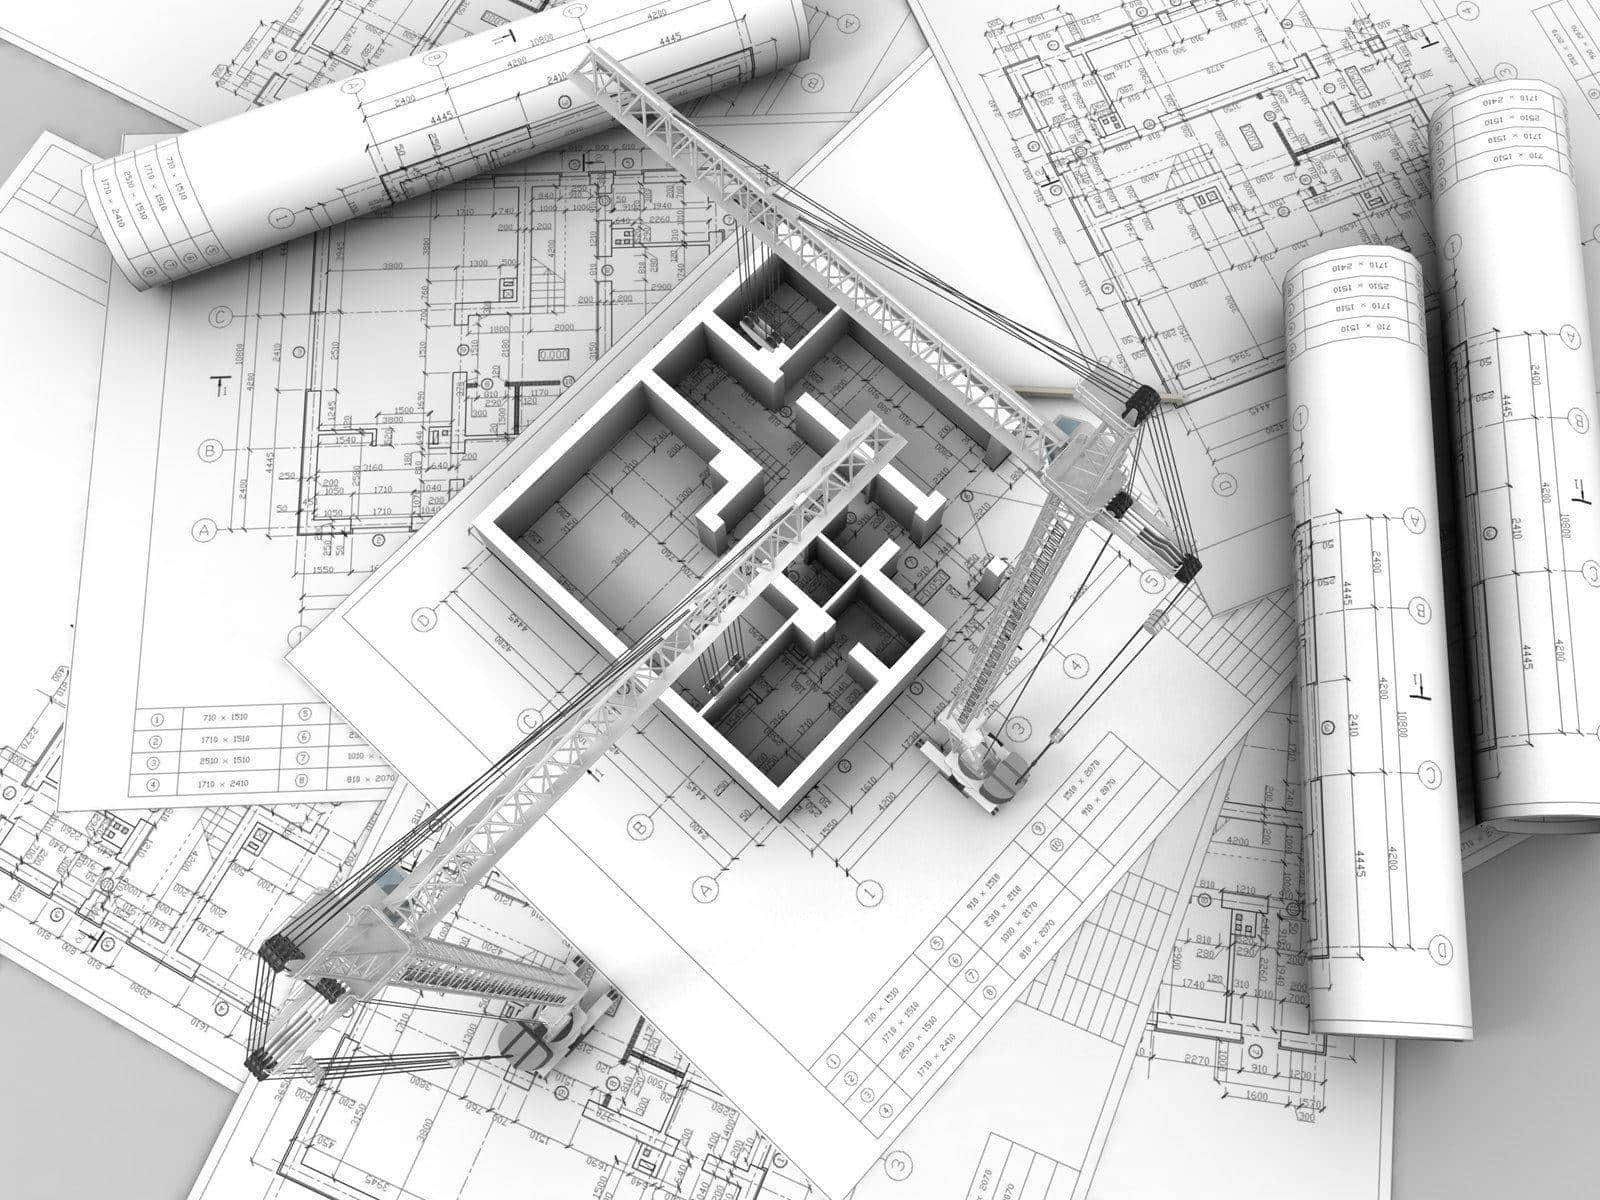 Architectural Plans And Blueprints On A White Background